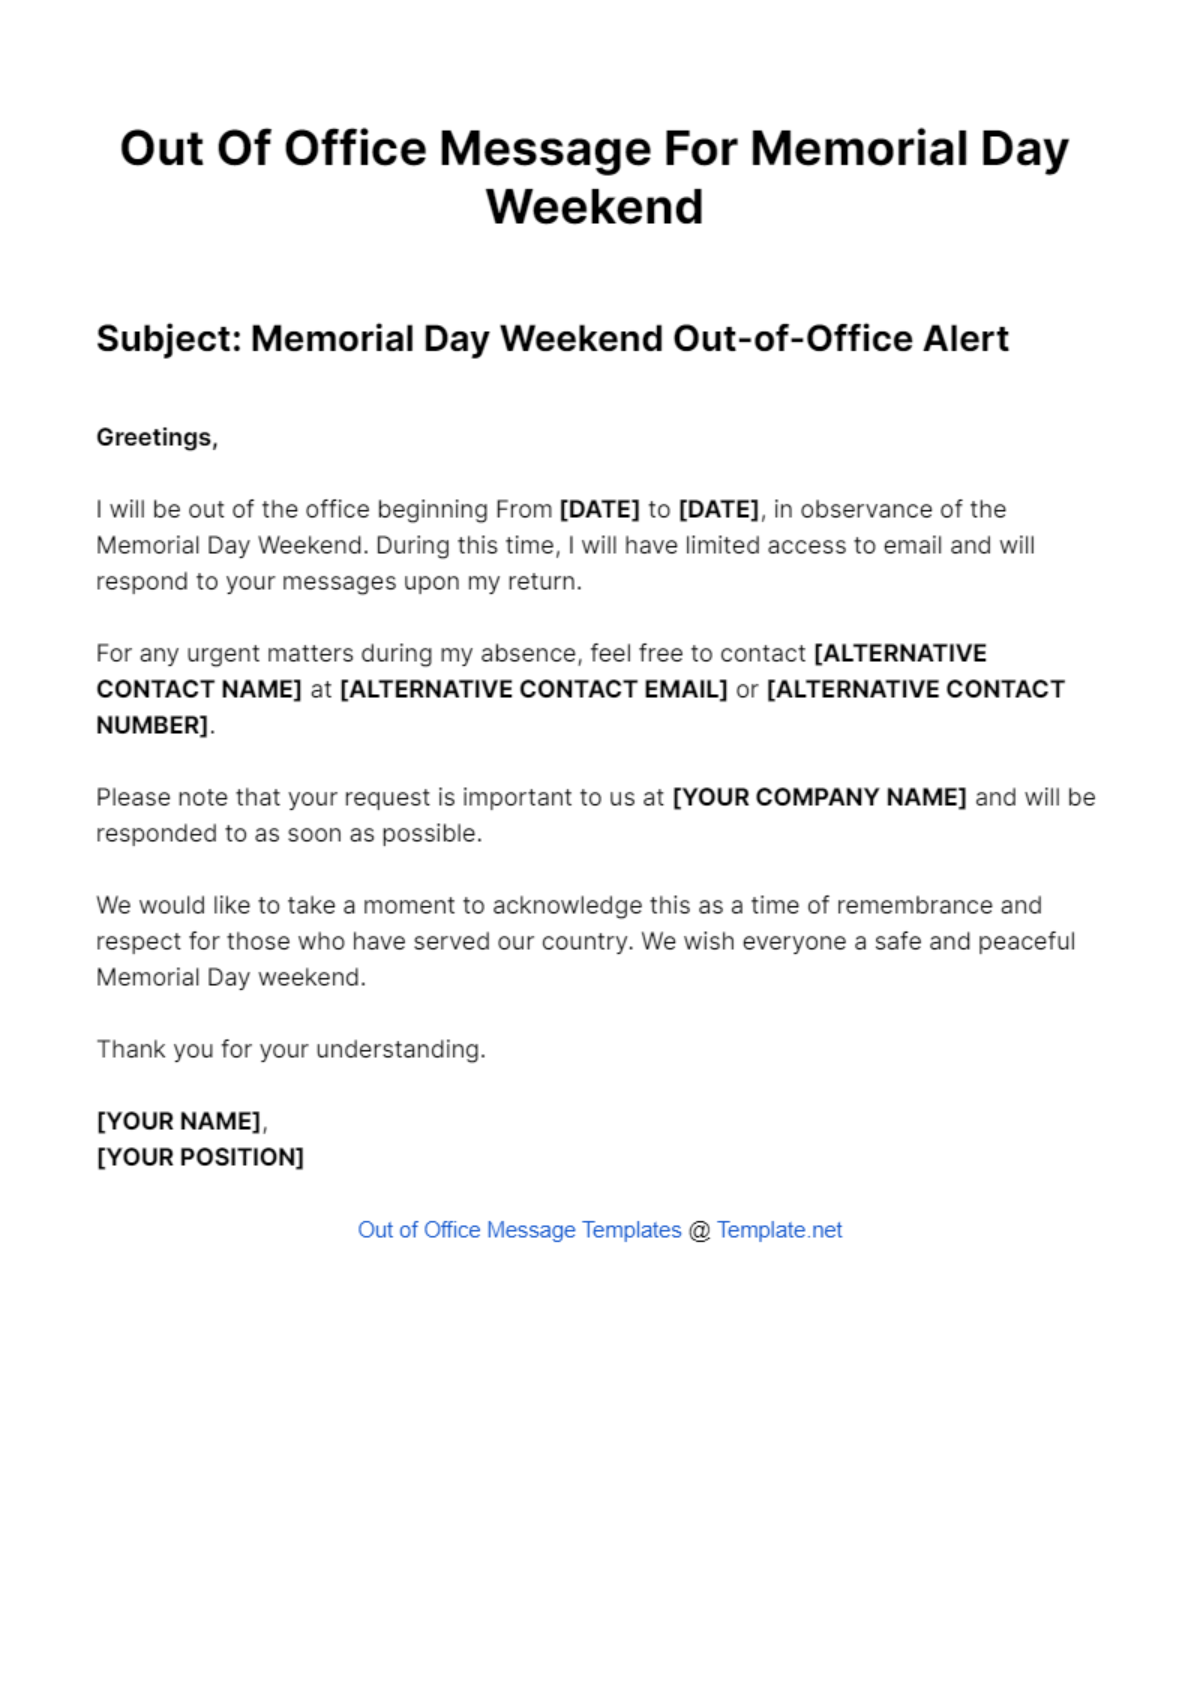 Out Of Office Message For Memorial Day Weekend Template